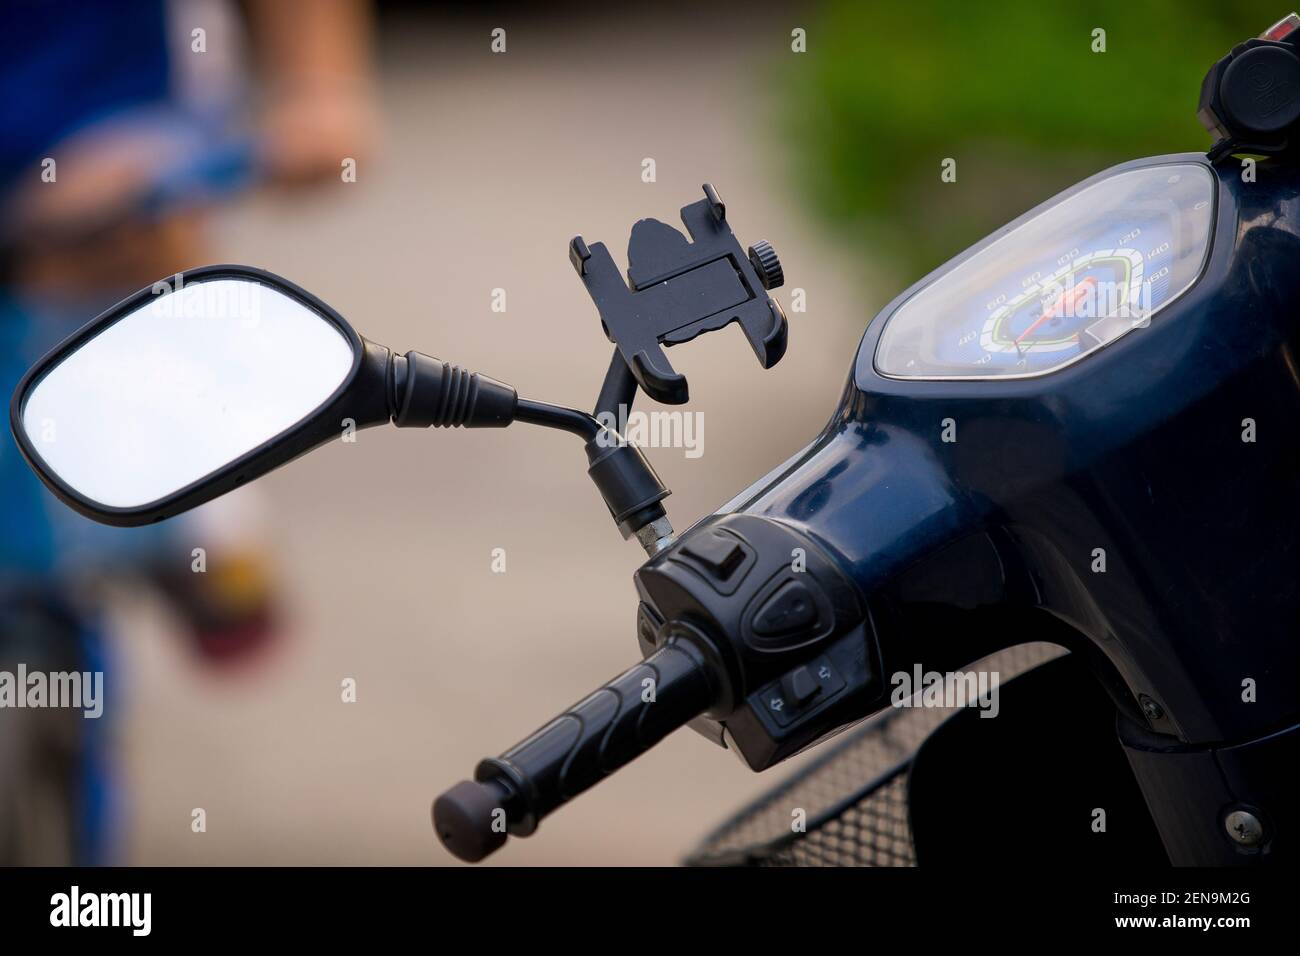 Motorcycle steering wheel with fairing and a case holder for a mobile phone. Stock Photo